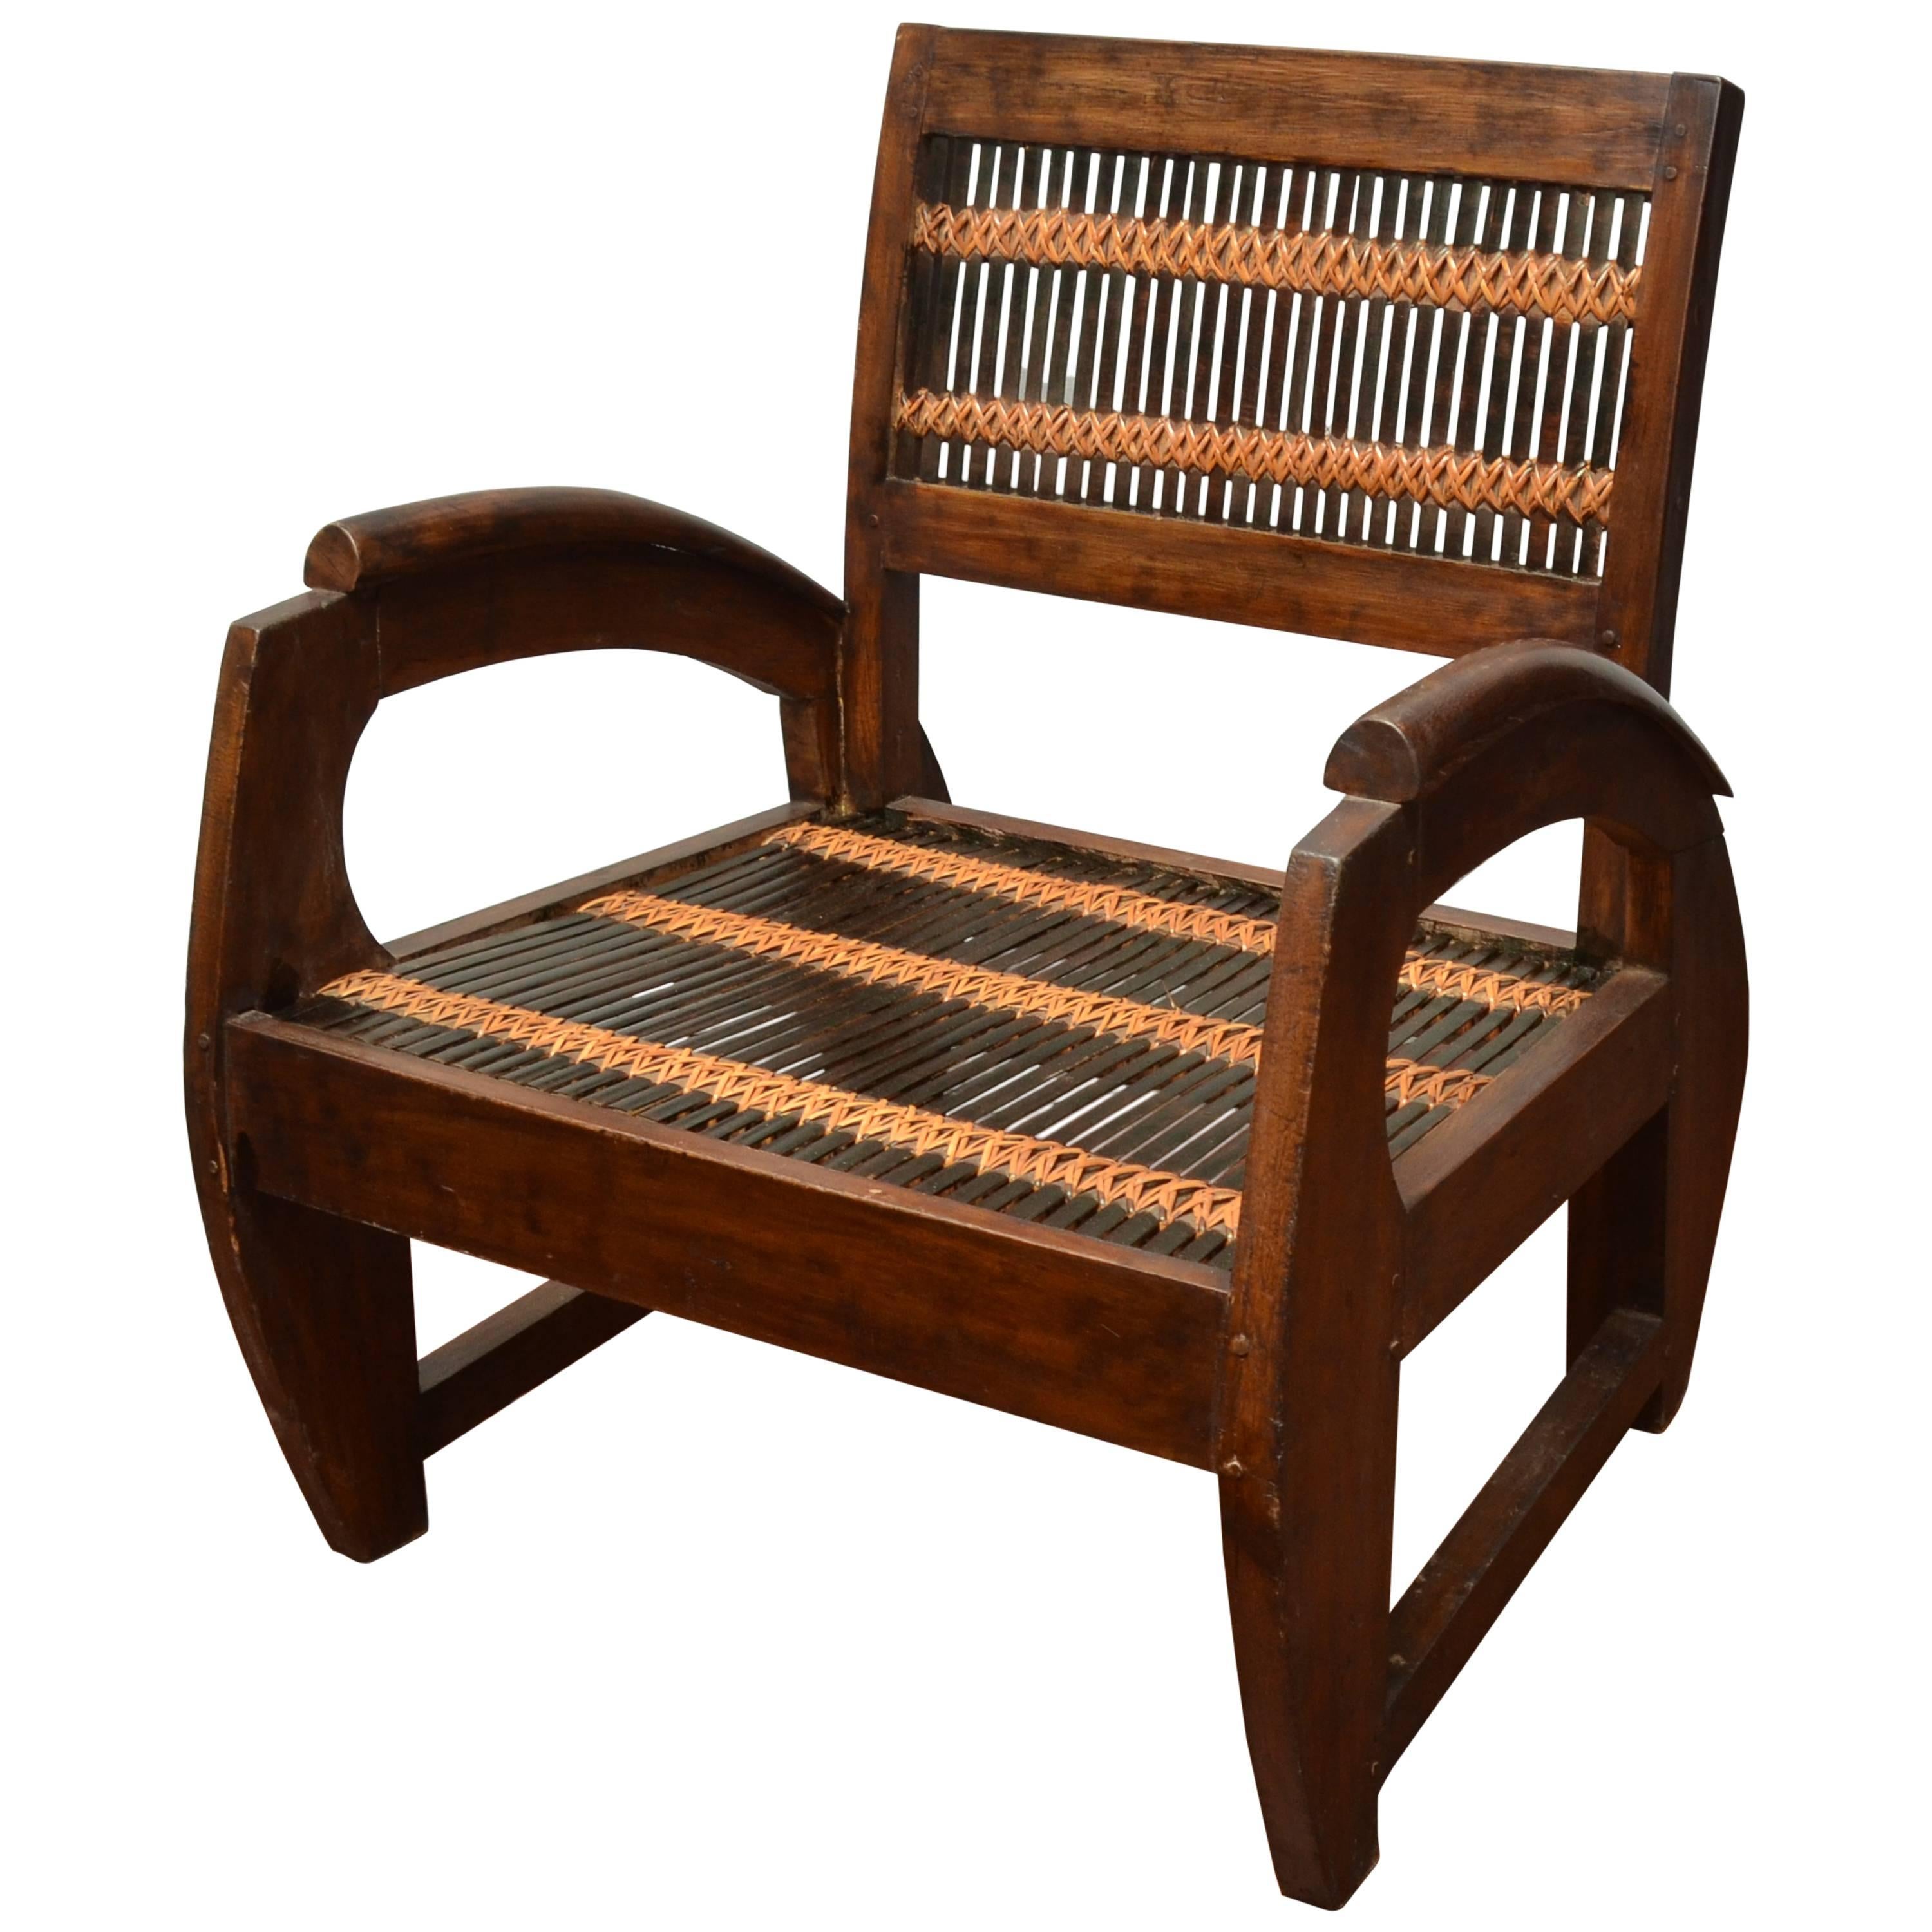 Turn of the Century Thai Colonial Cild's Open Armchair with Unusual Bamboo Weave